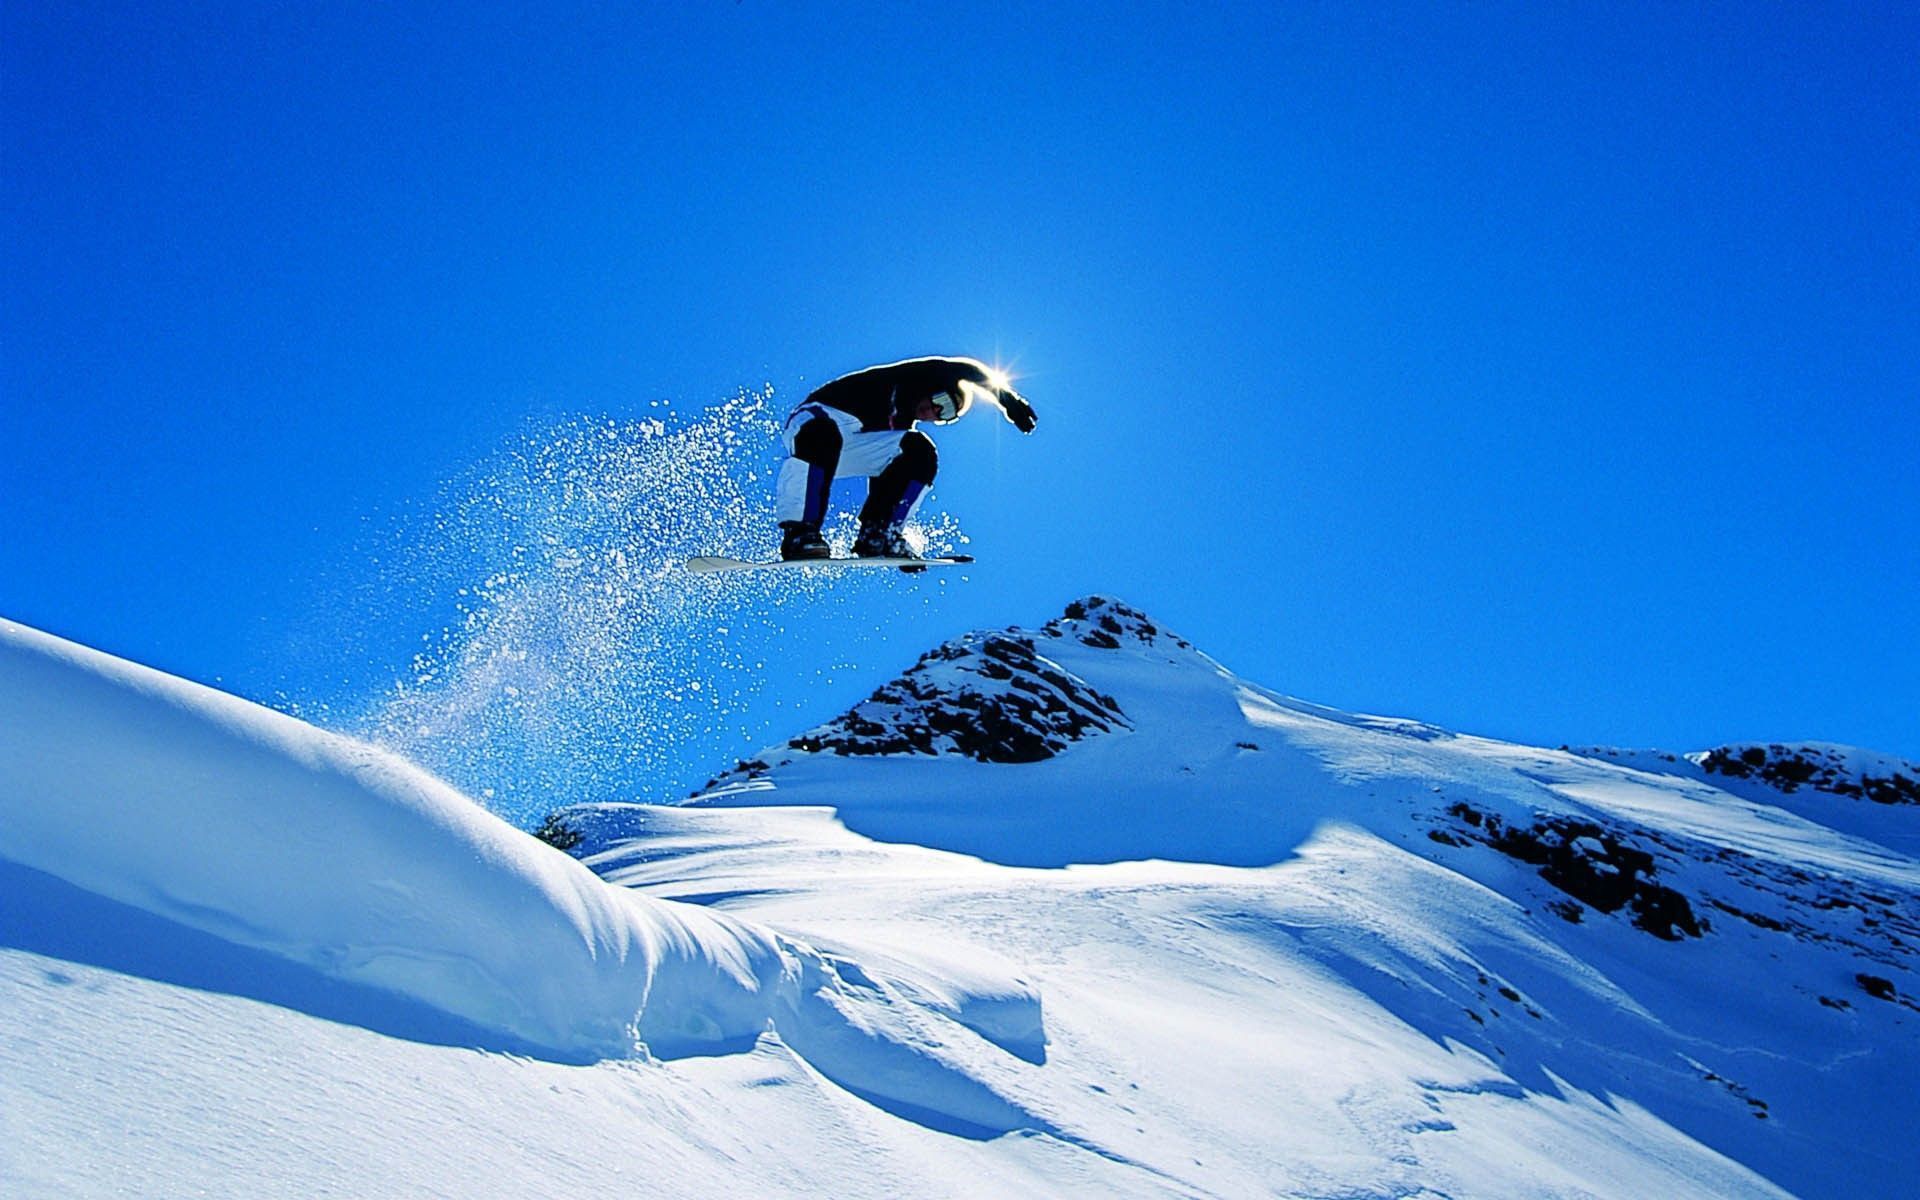 Top Cool Snowboarding Wallpapers Images for Pinterest